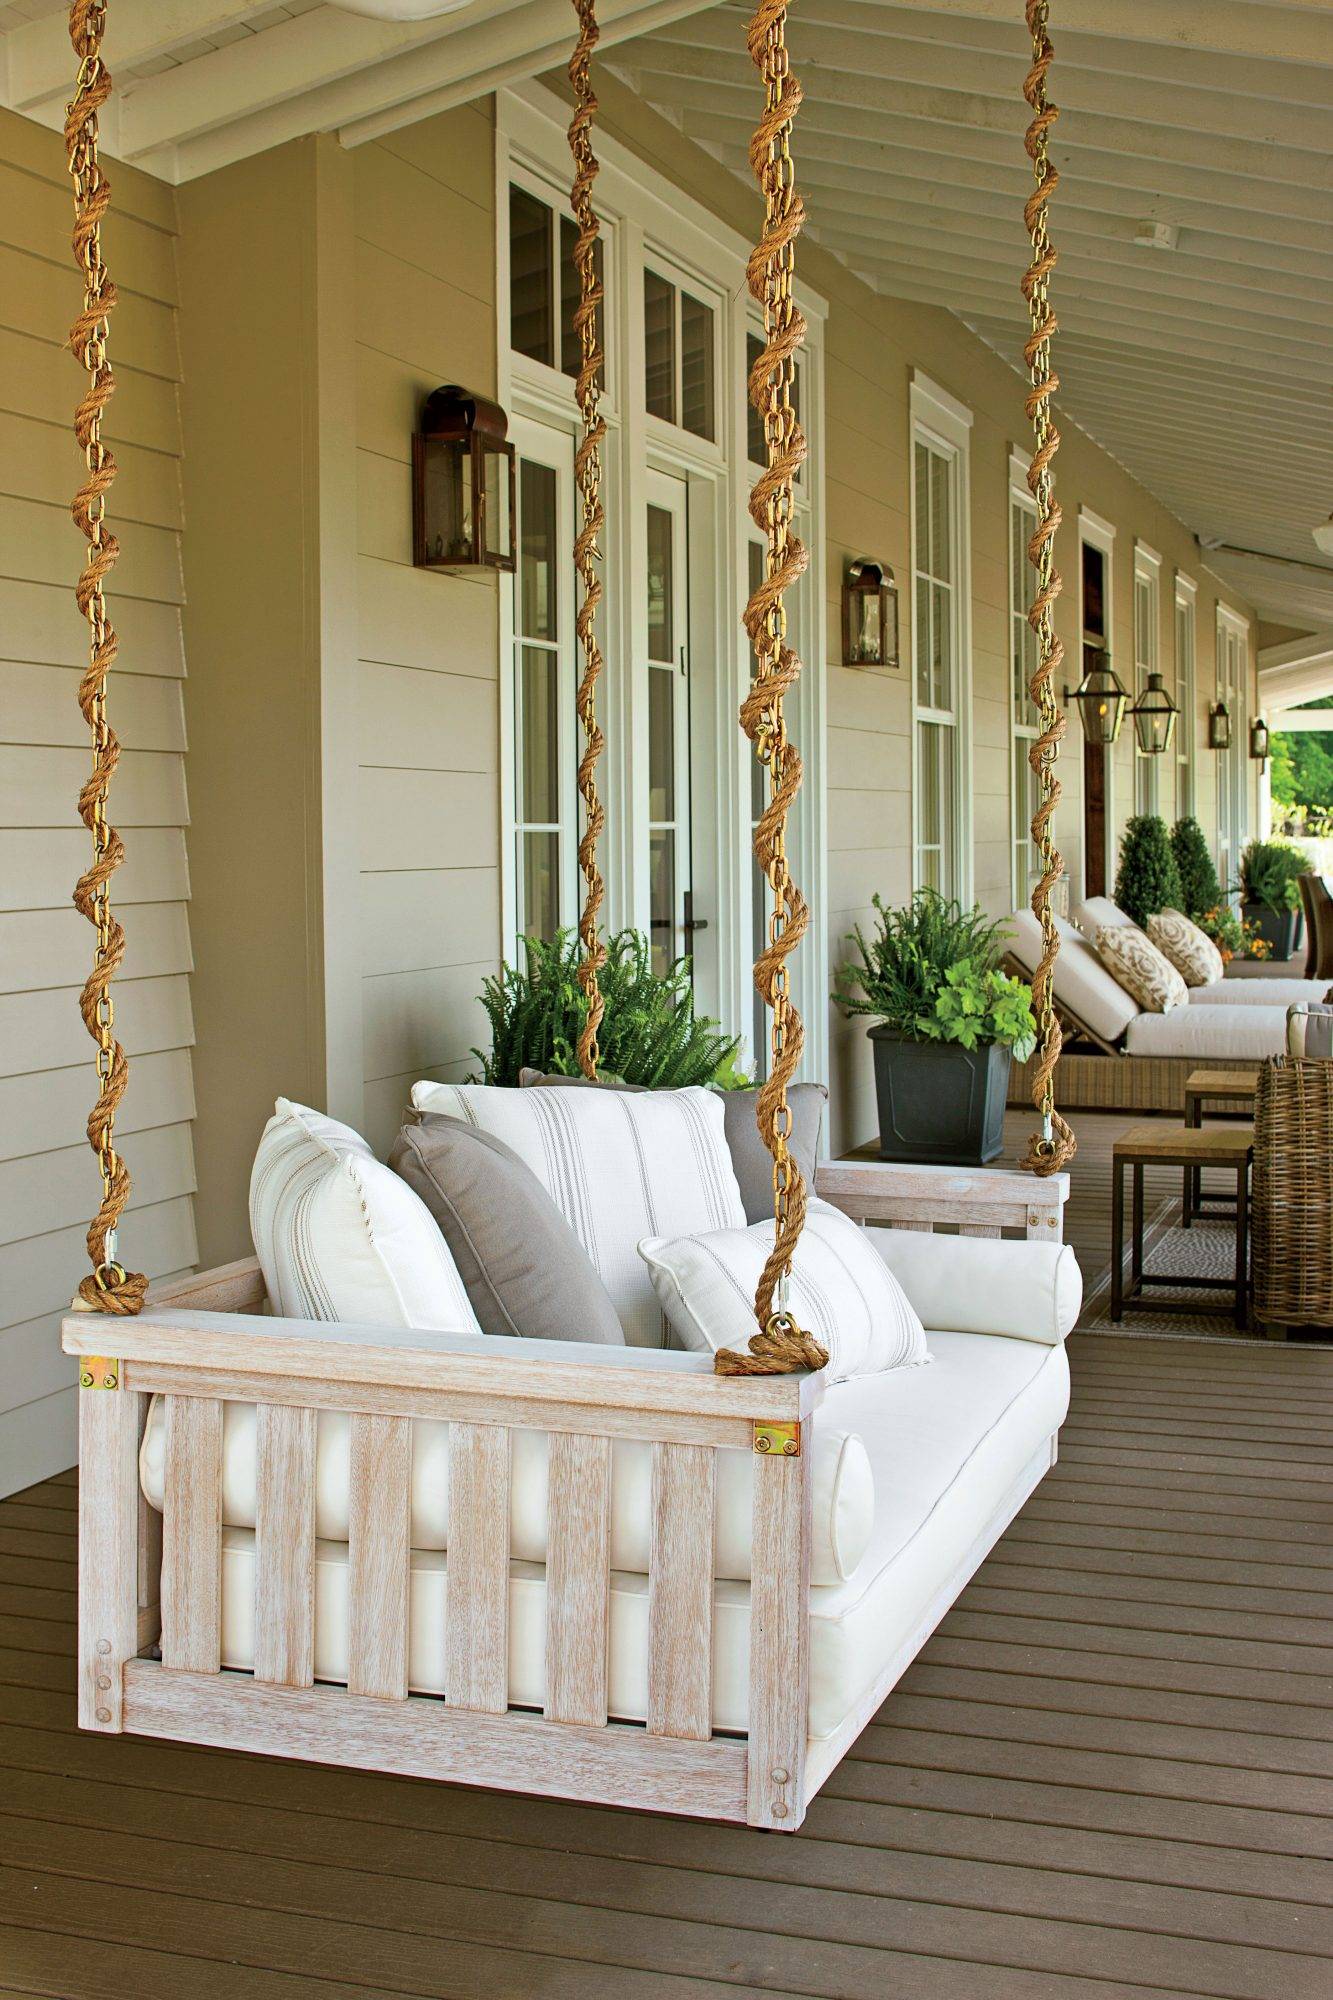 White Porch Swing Bed